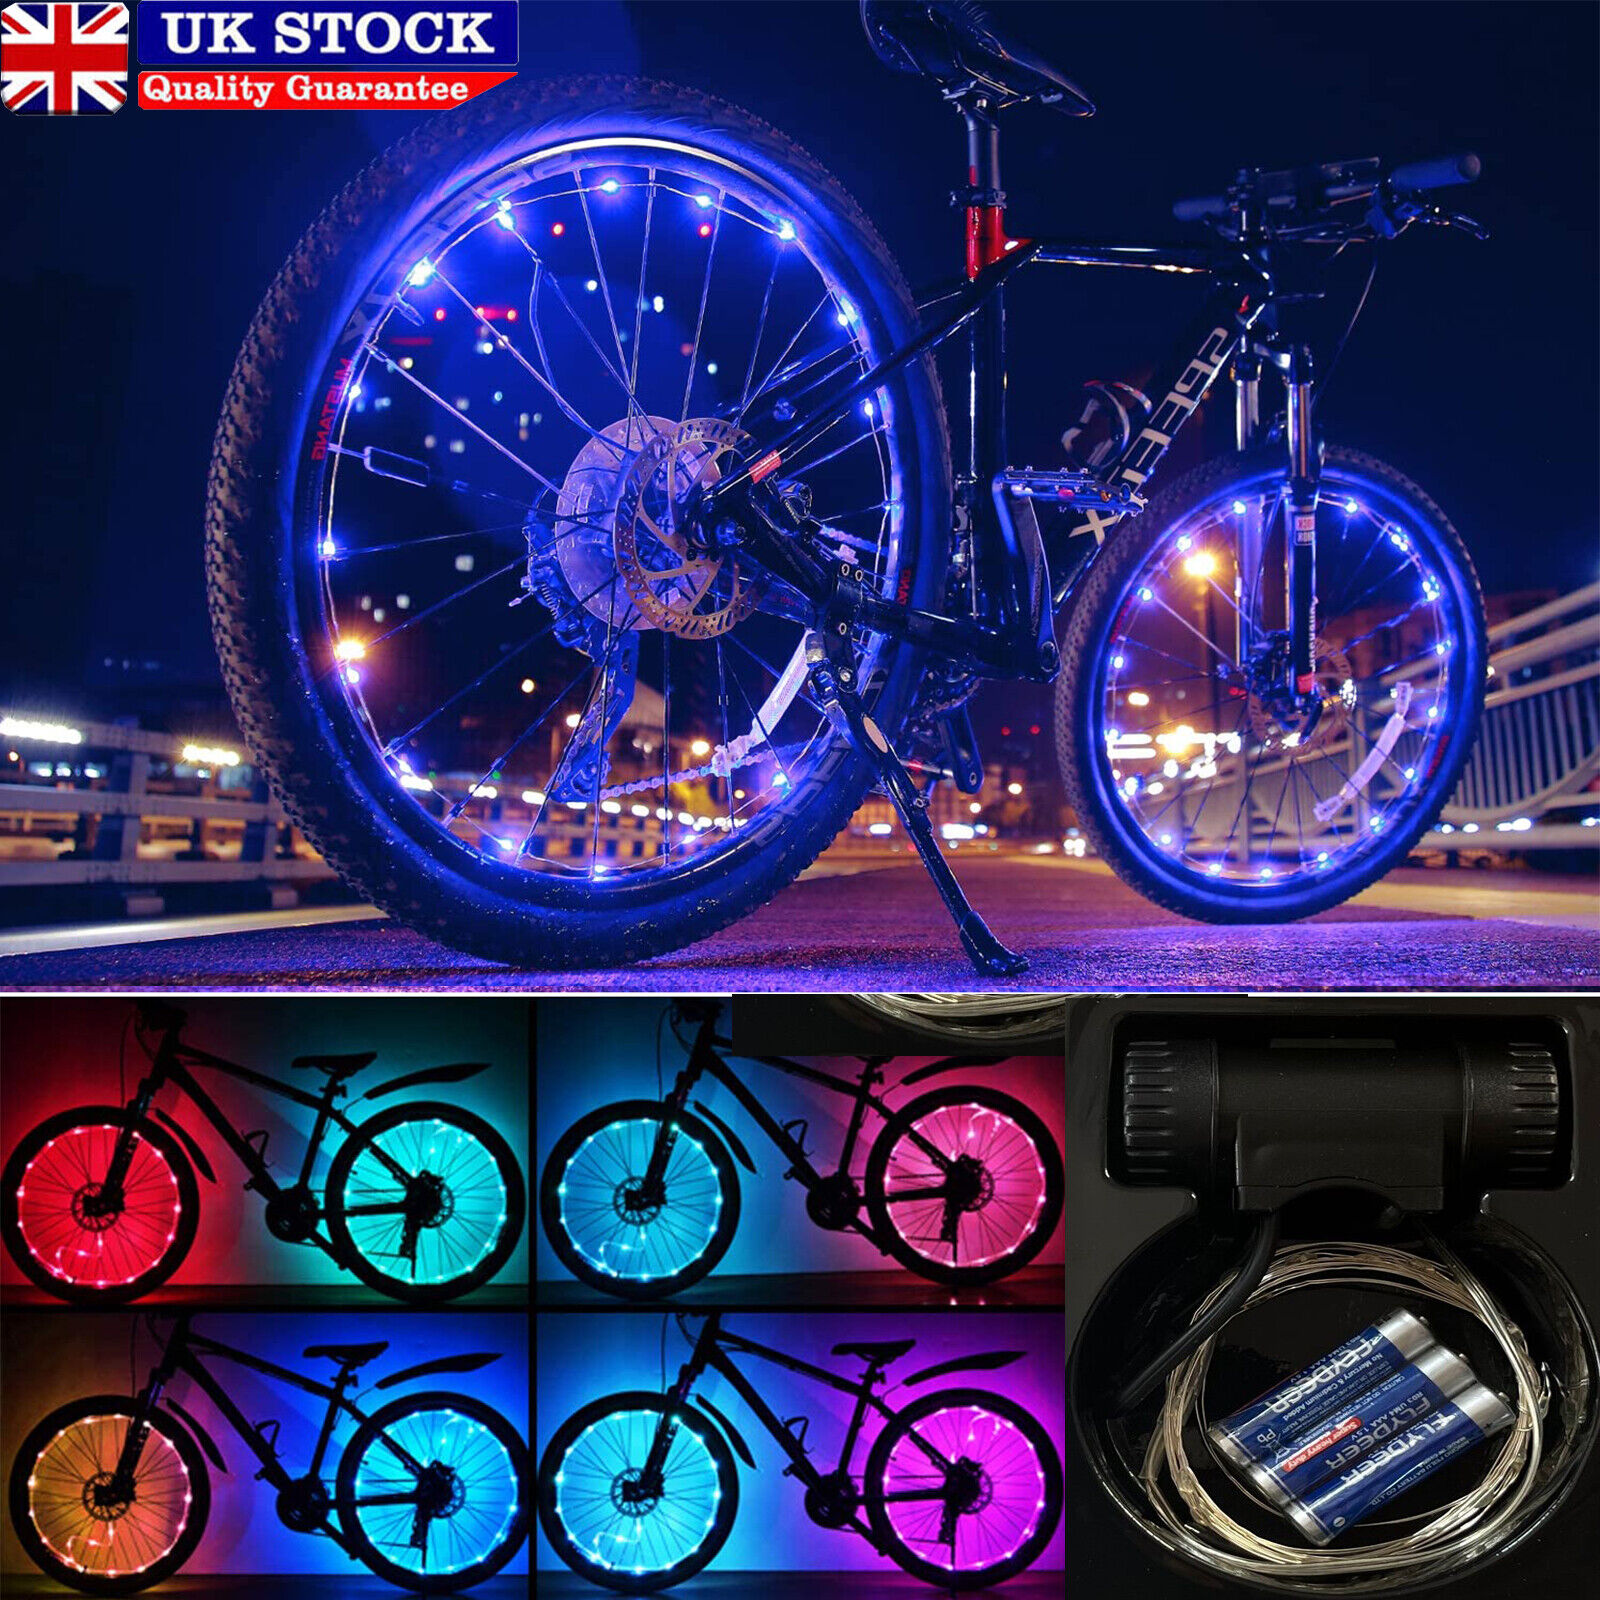 Pink LED Bike Wheel Lights Brighter and Visible from All Angles for Ultimate Safety and Style 1 Tyre Pack